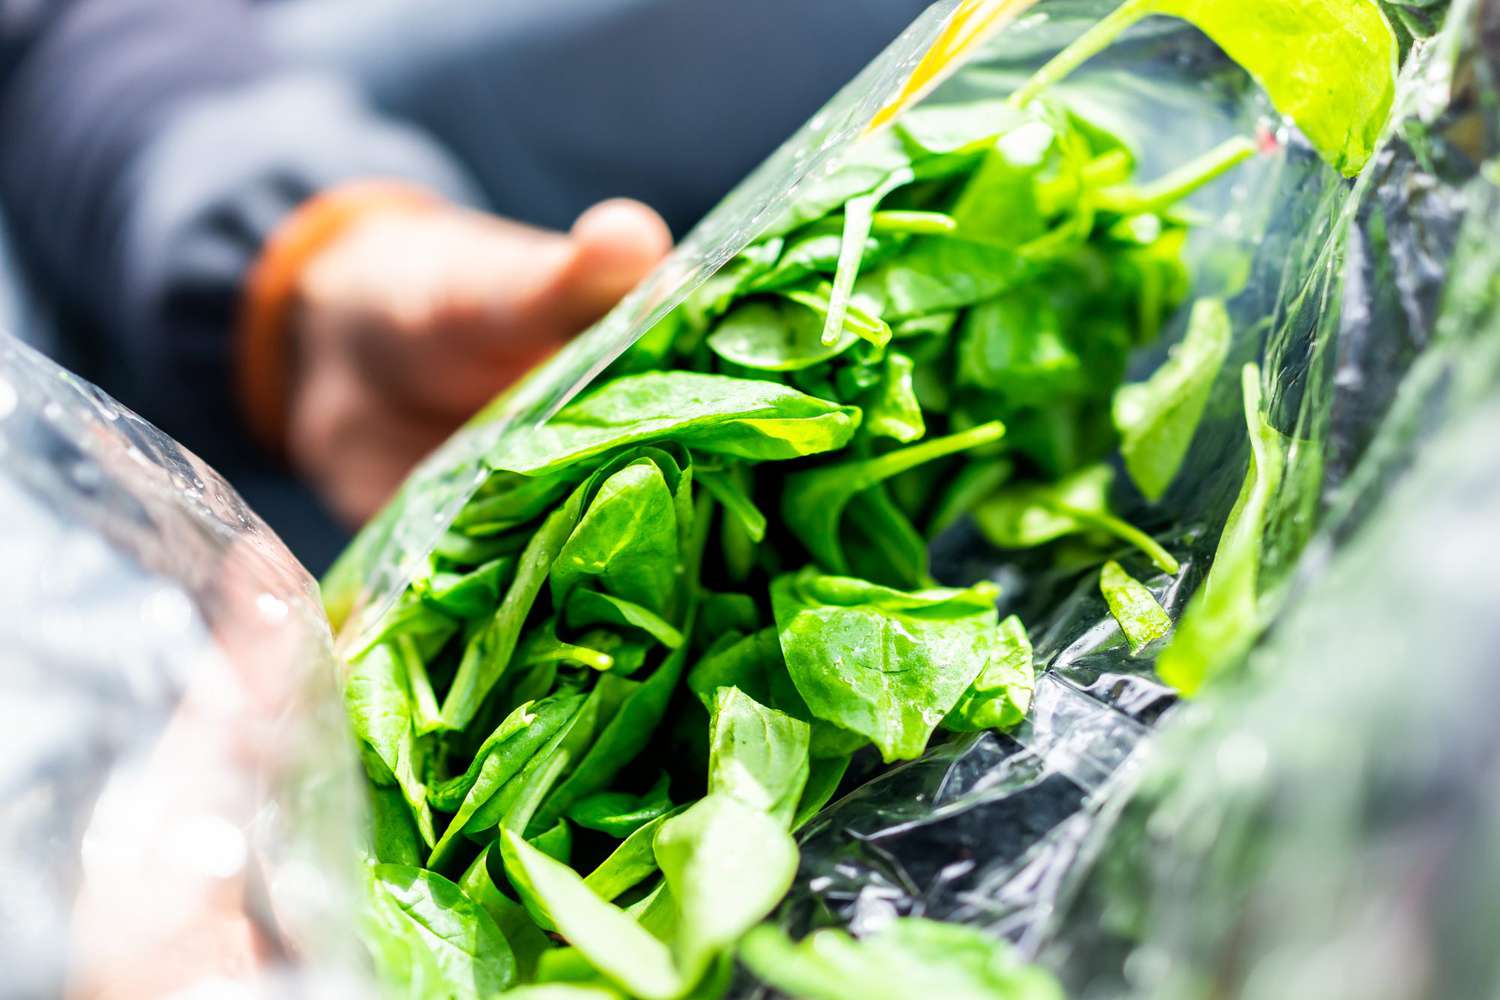 Closeup of person hands holding fresh raw, plastic packaged bag of green spinach, vibrant color